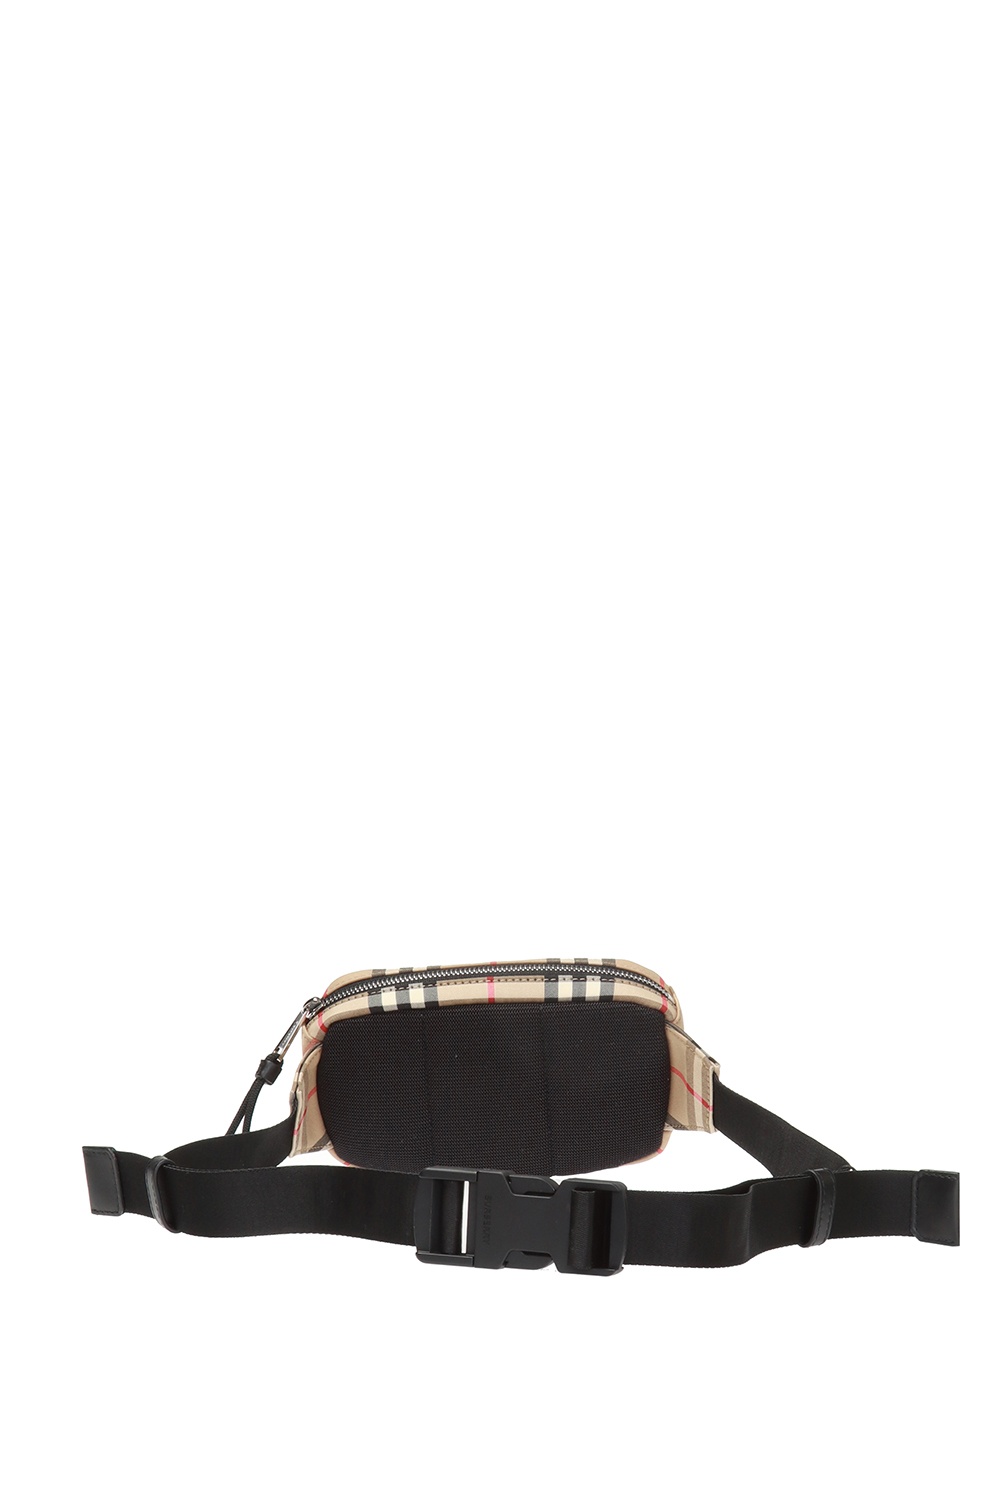 IetpShops TW - 'Cannon' belt bag with straps Pre-Owned Burberry - Pre-Owned  Burberry shoes represent perfect finishing for womens outfit